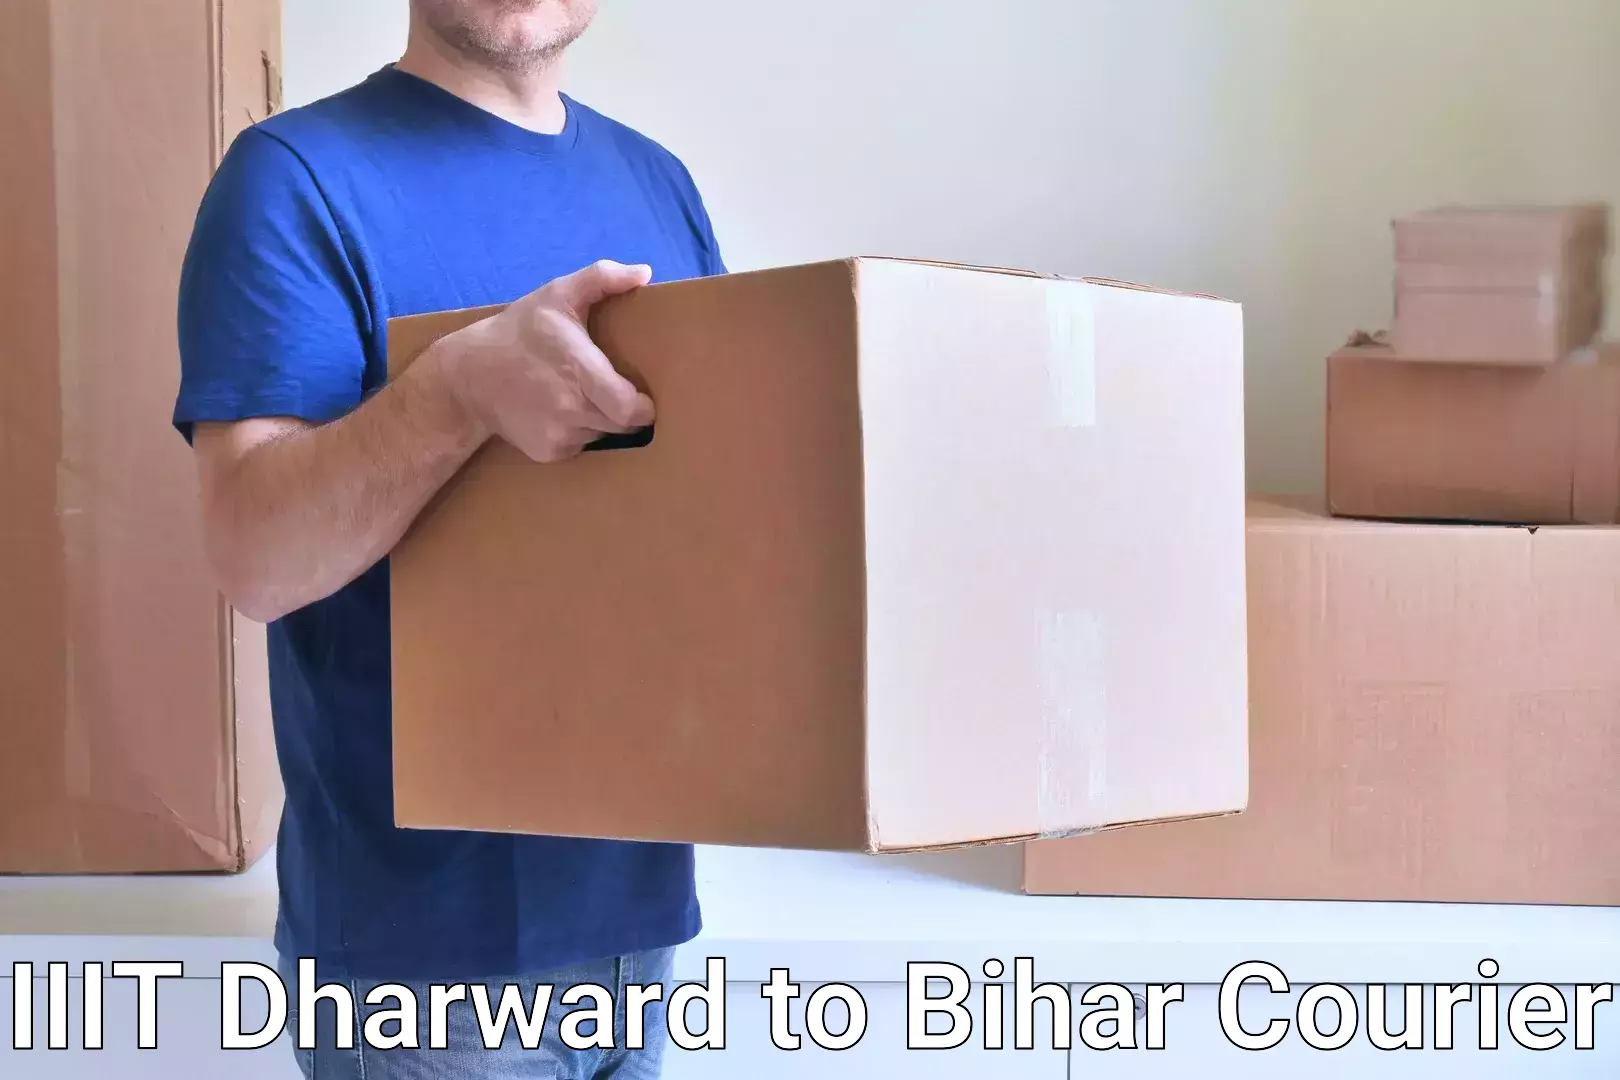 Multi-national courier services in IIIT Dharward to Baniapur